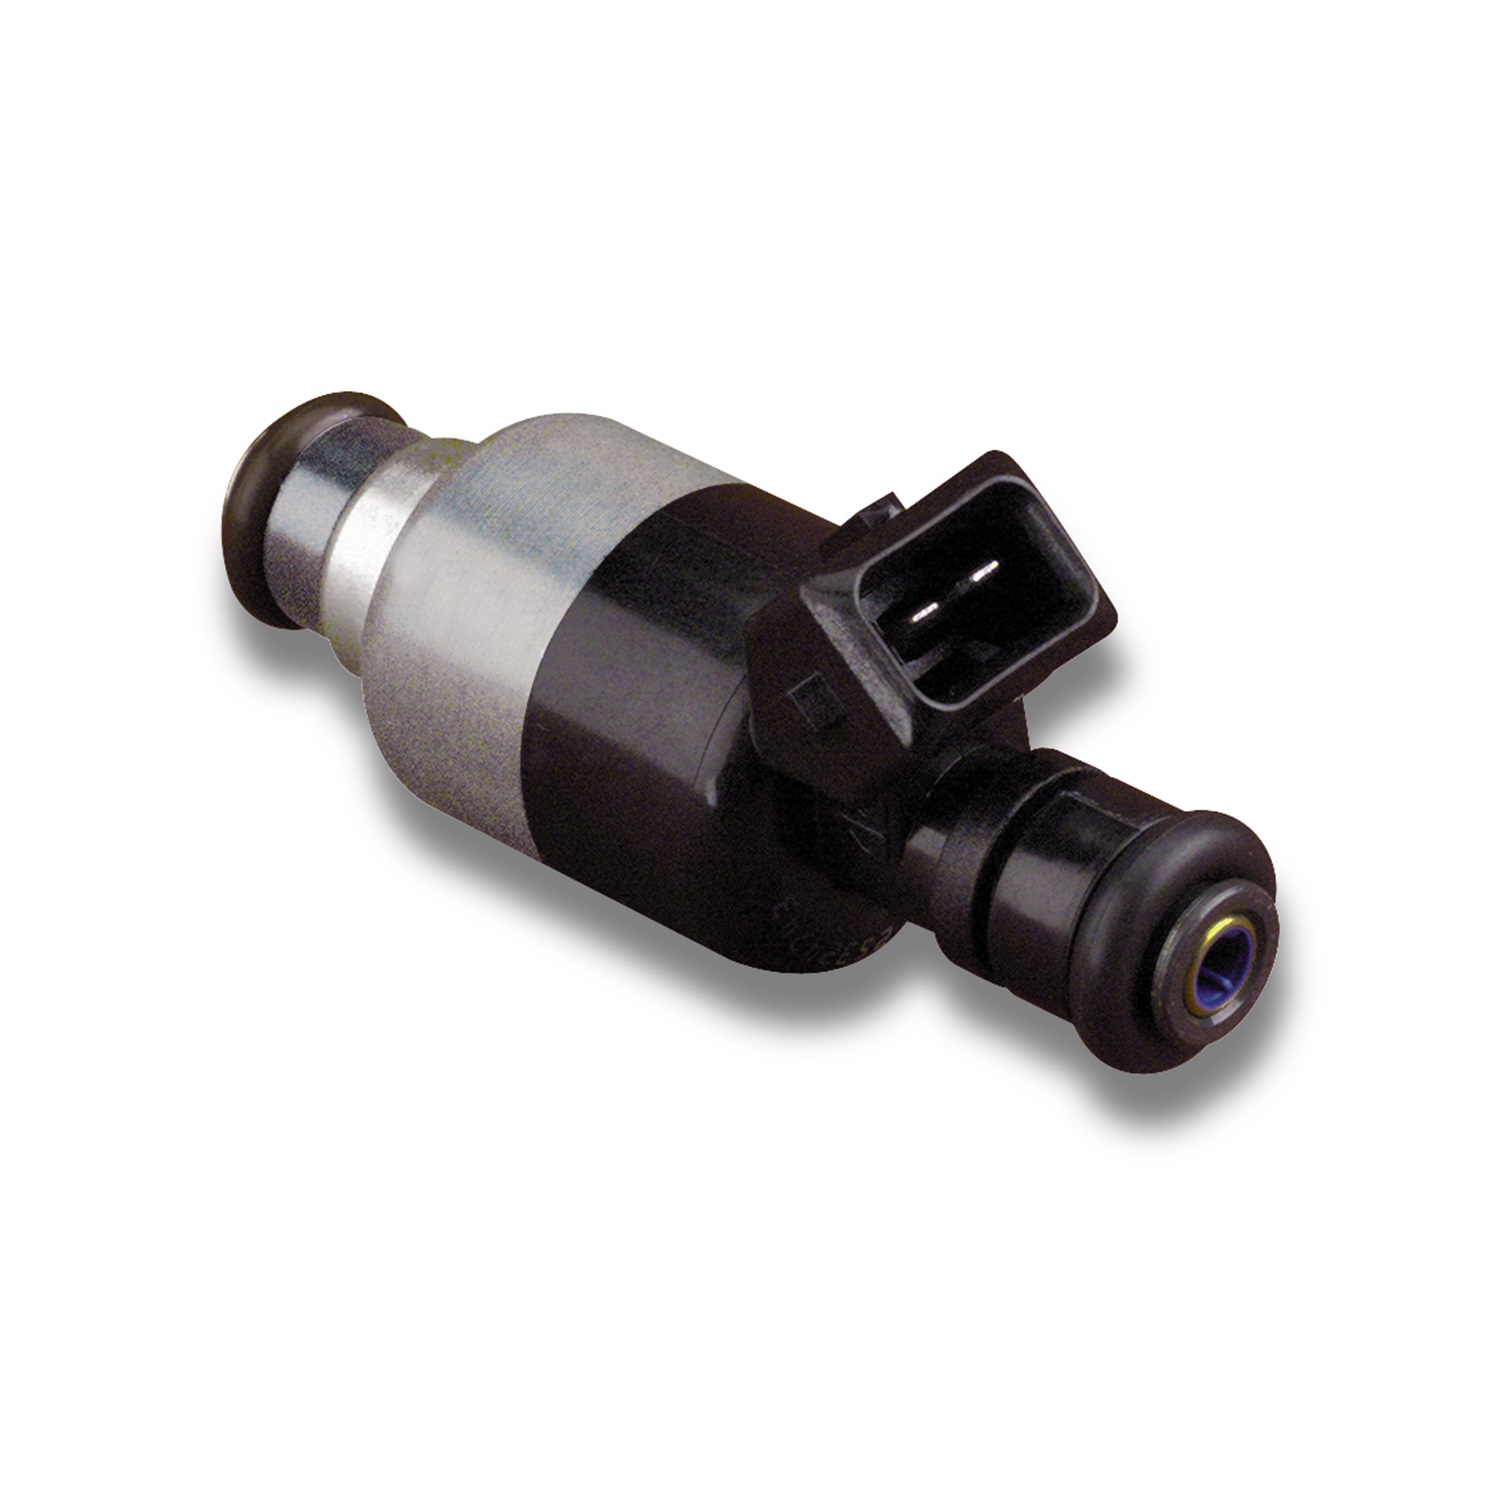 Holley Performance 522-488 Universal Fuel Injector